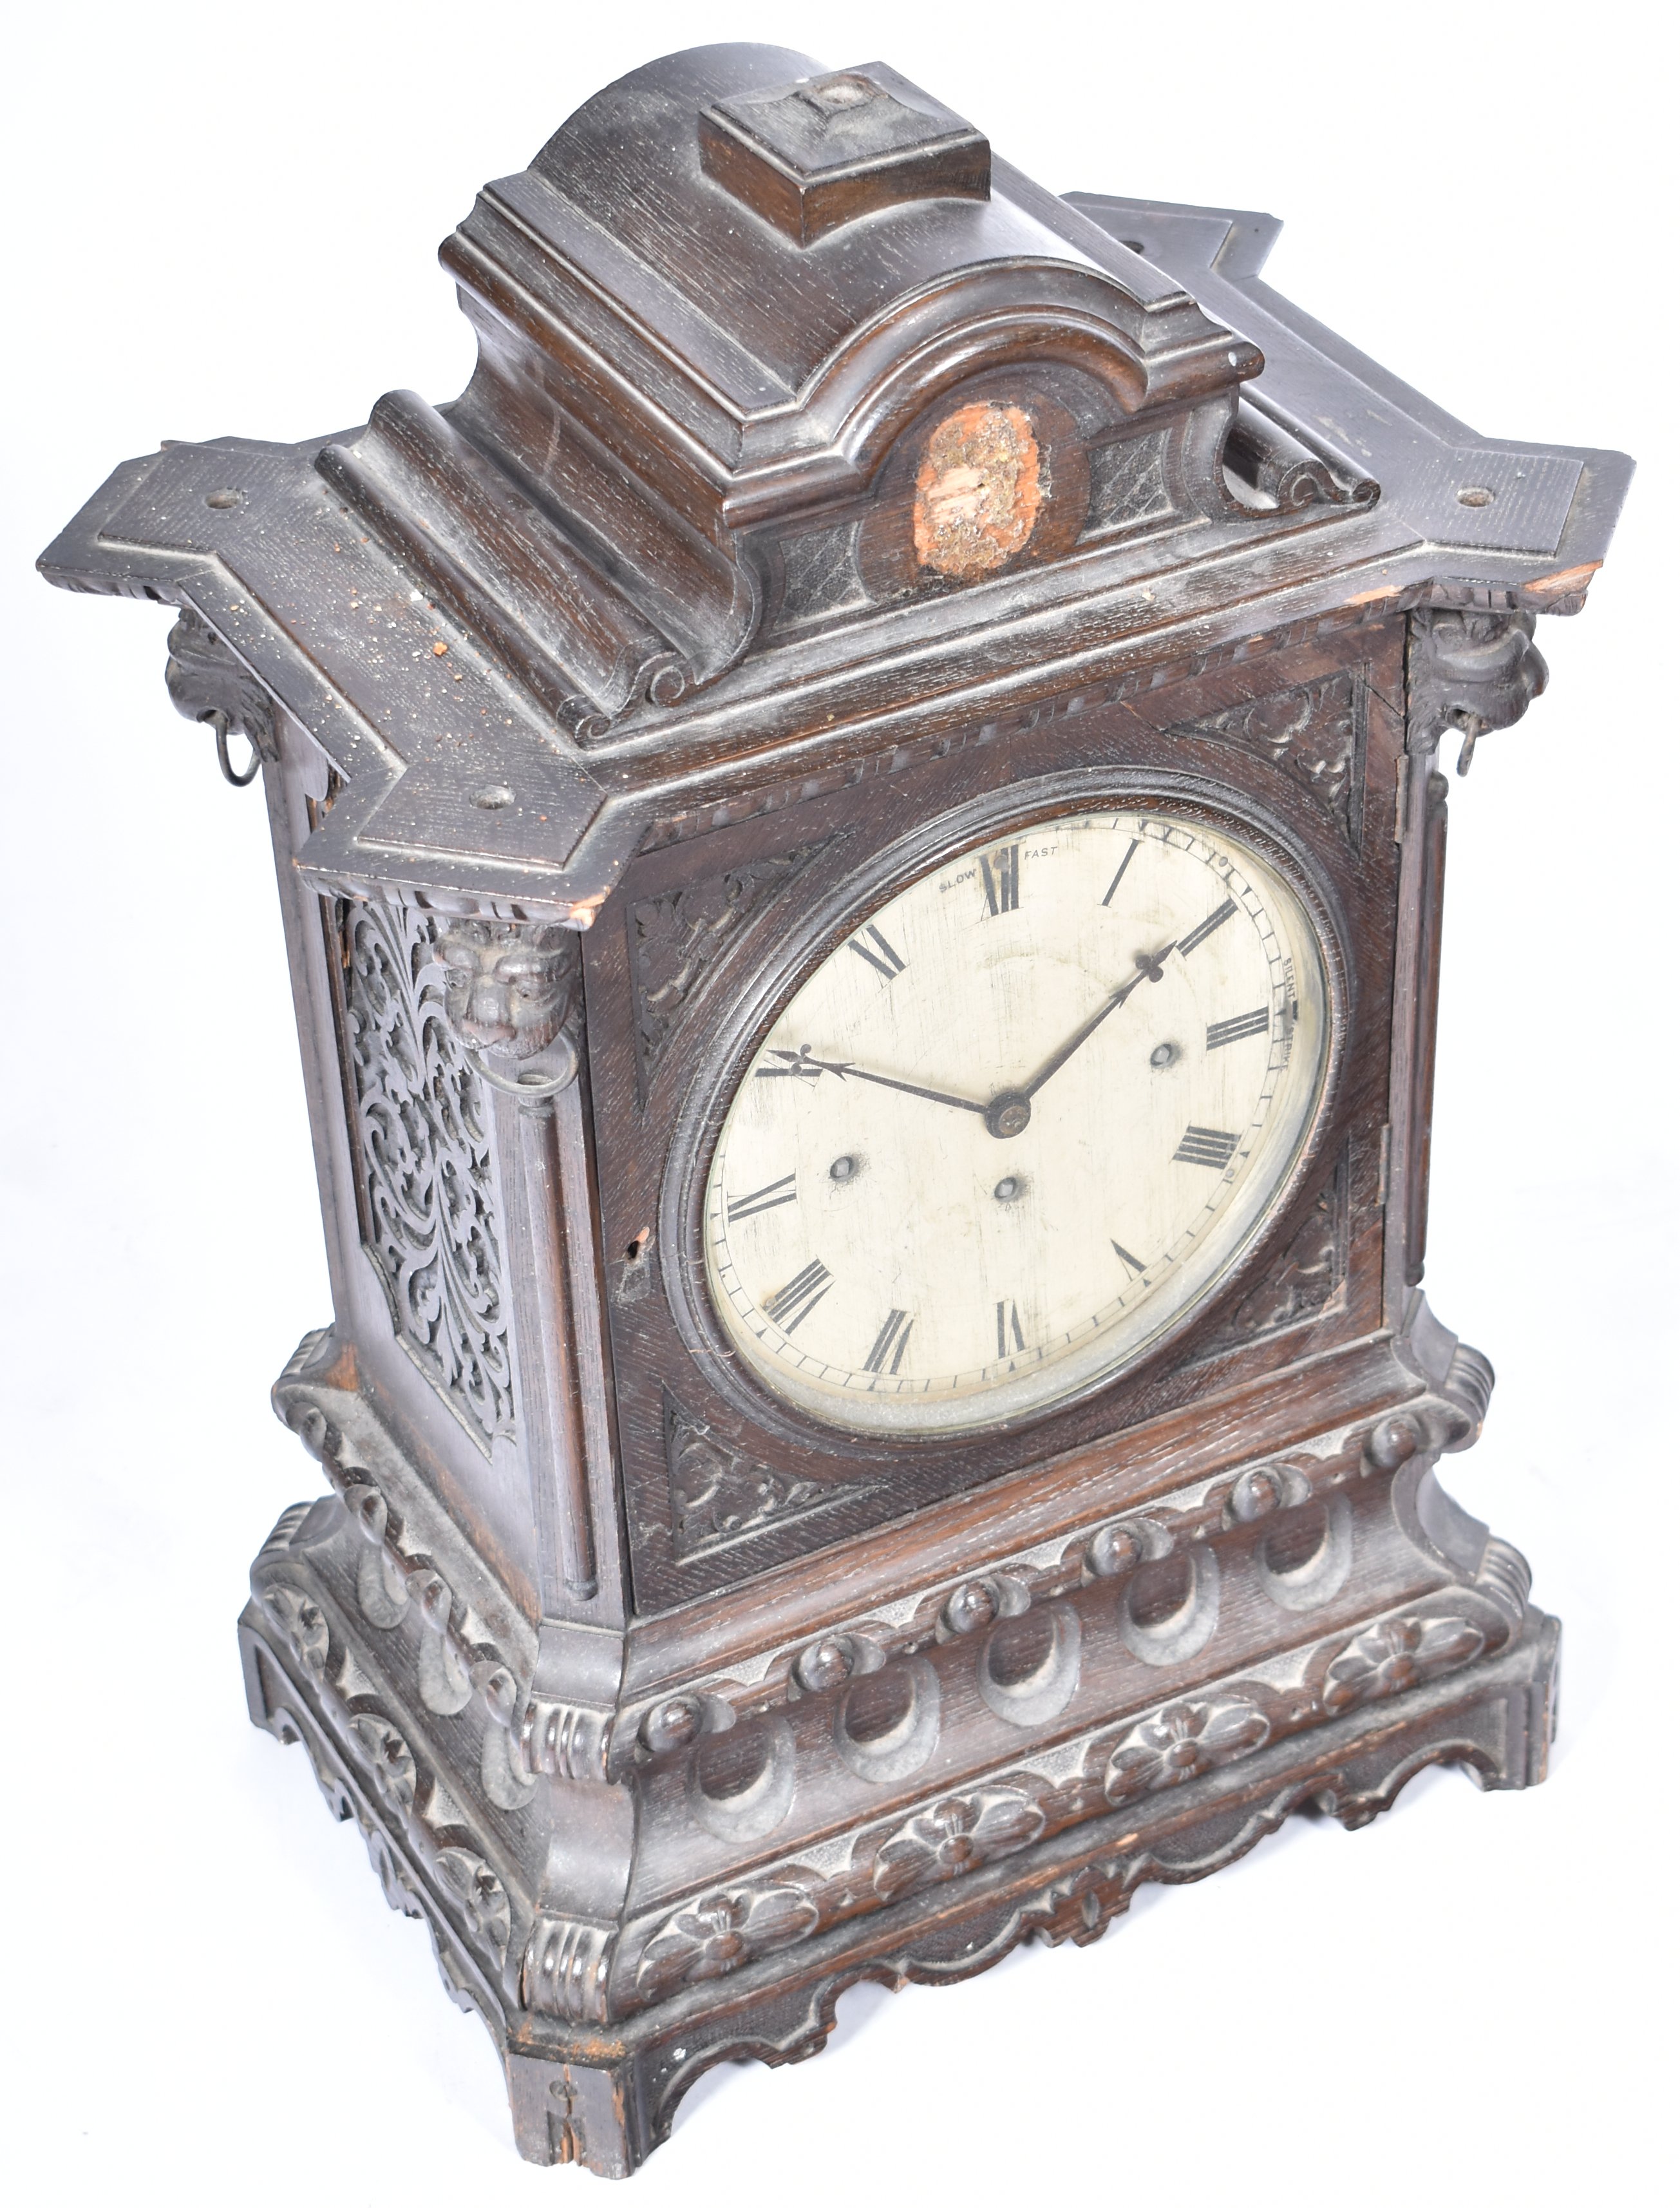 LARGE 19TH CENTURY GOTHIC REVIVAL 8 BELL FUSEE CLOCK - Image 2 of 10